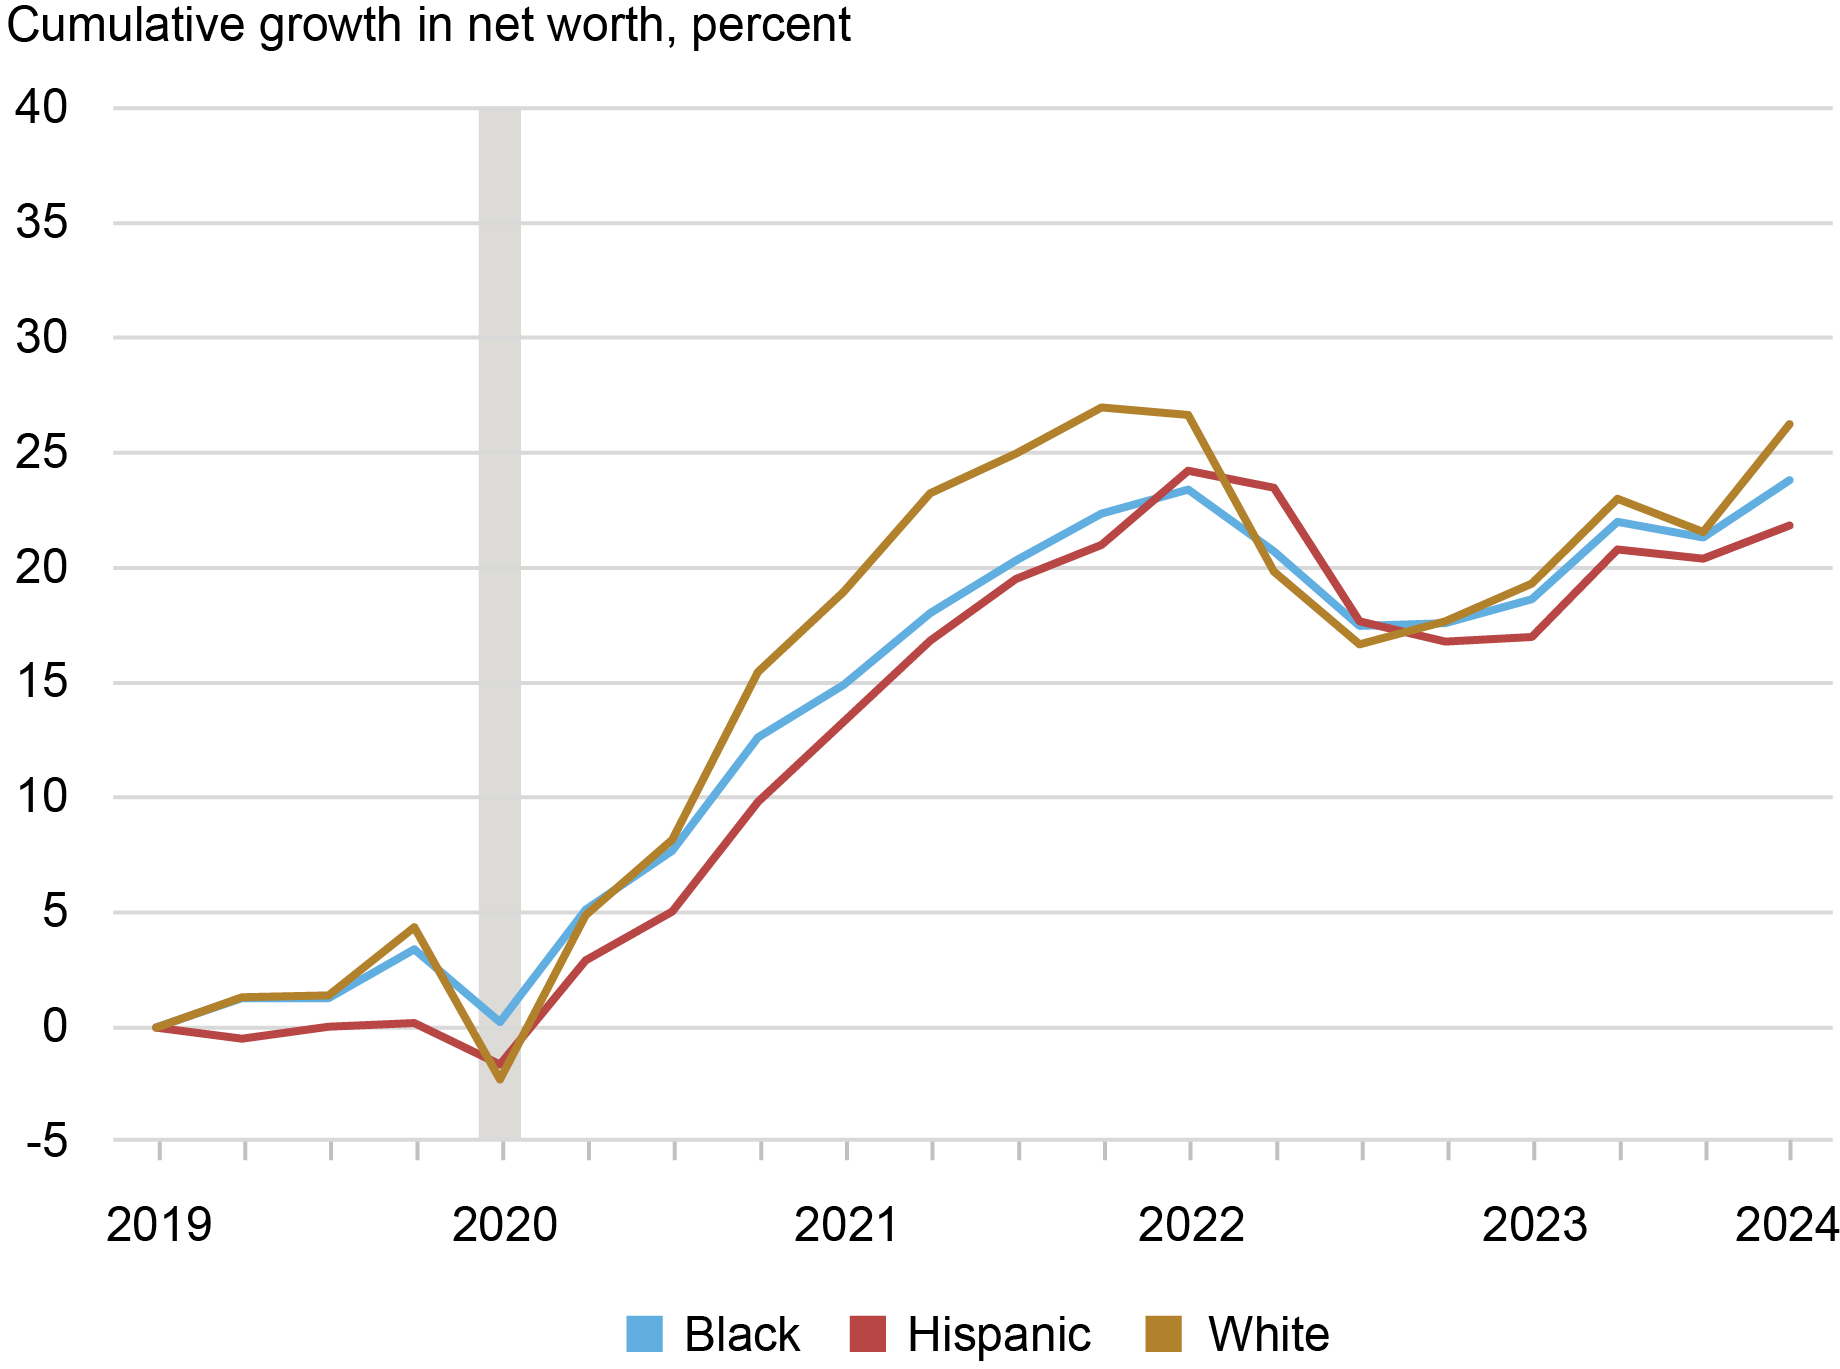 Alt=”line chart tracking cumulative net worth growth by percentage in household wealth from 2019 through 2023 for Black (blue), Hispanic (red), and white (gold) households” 